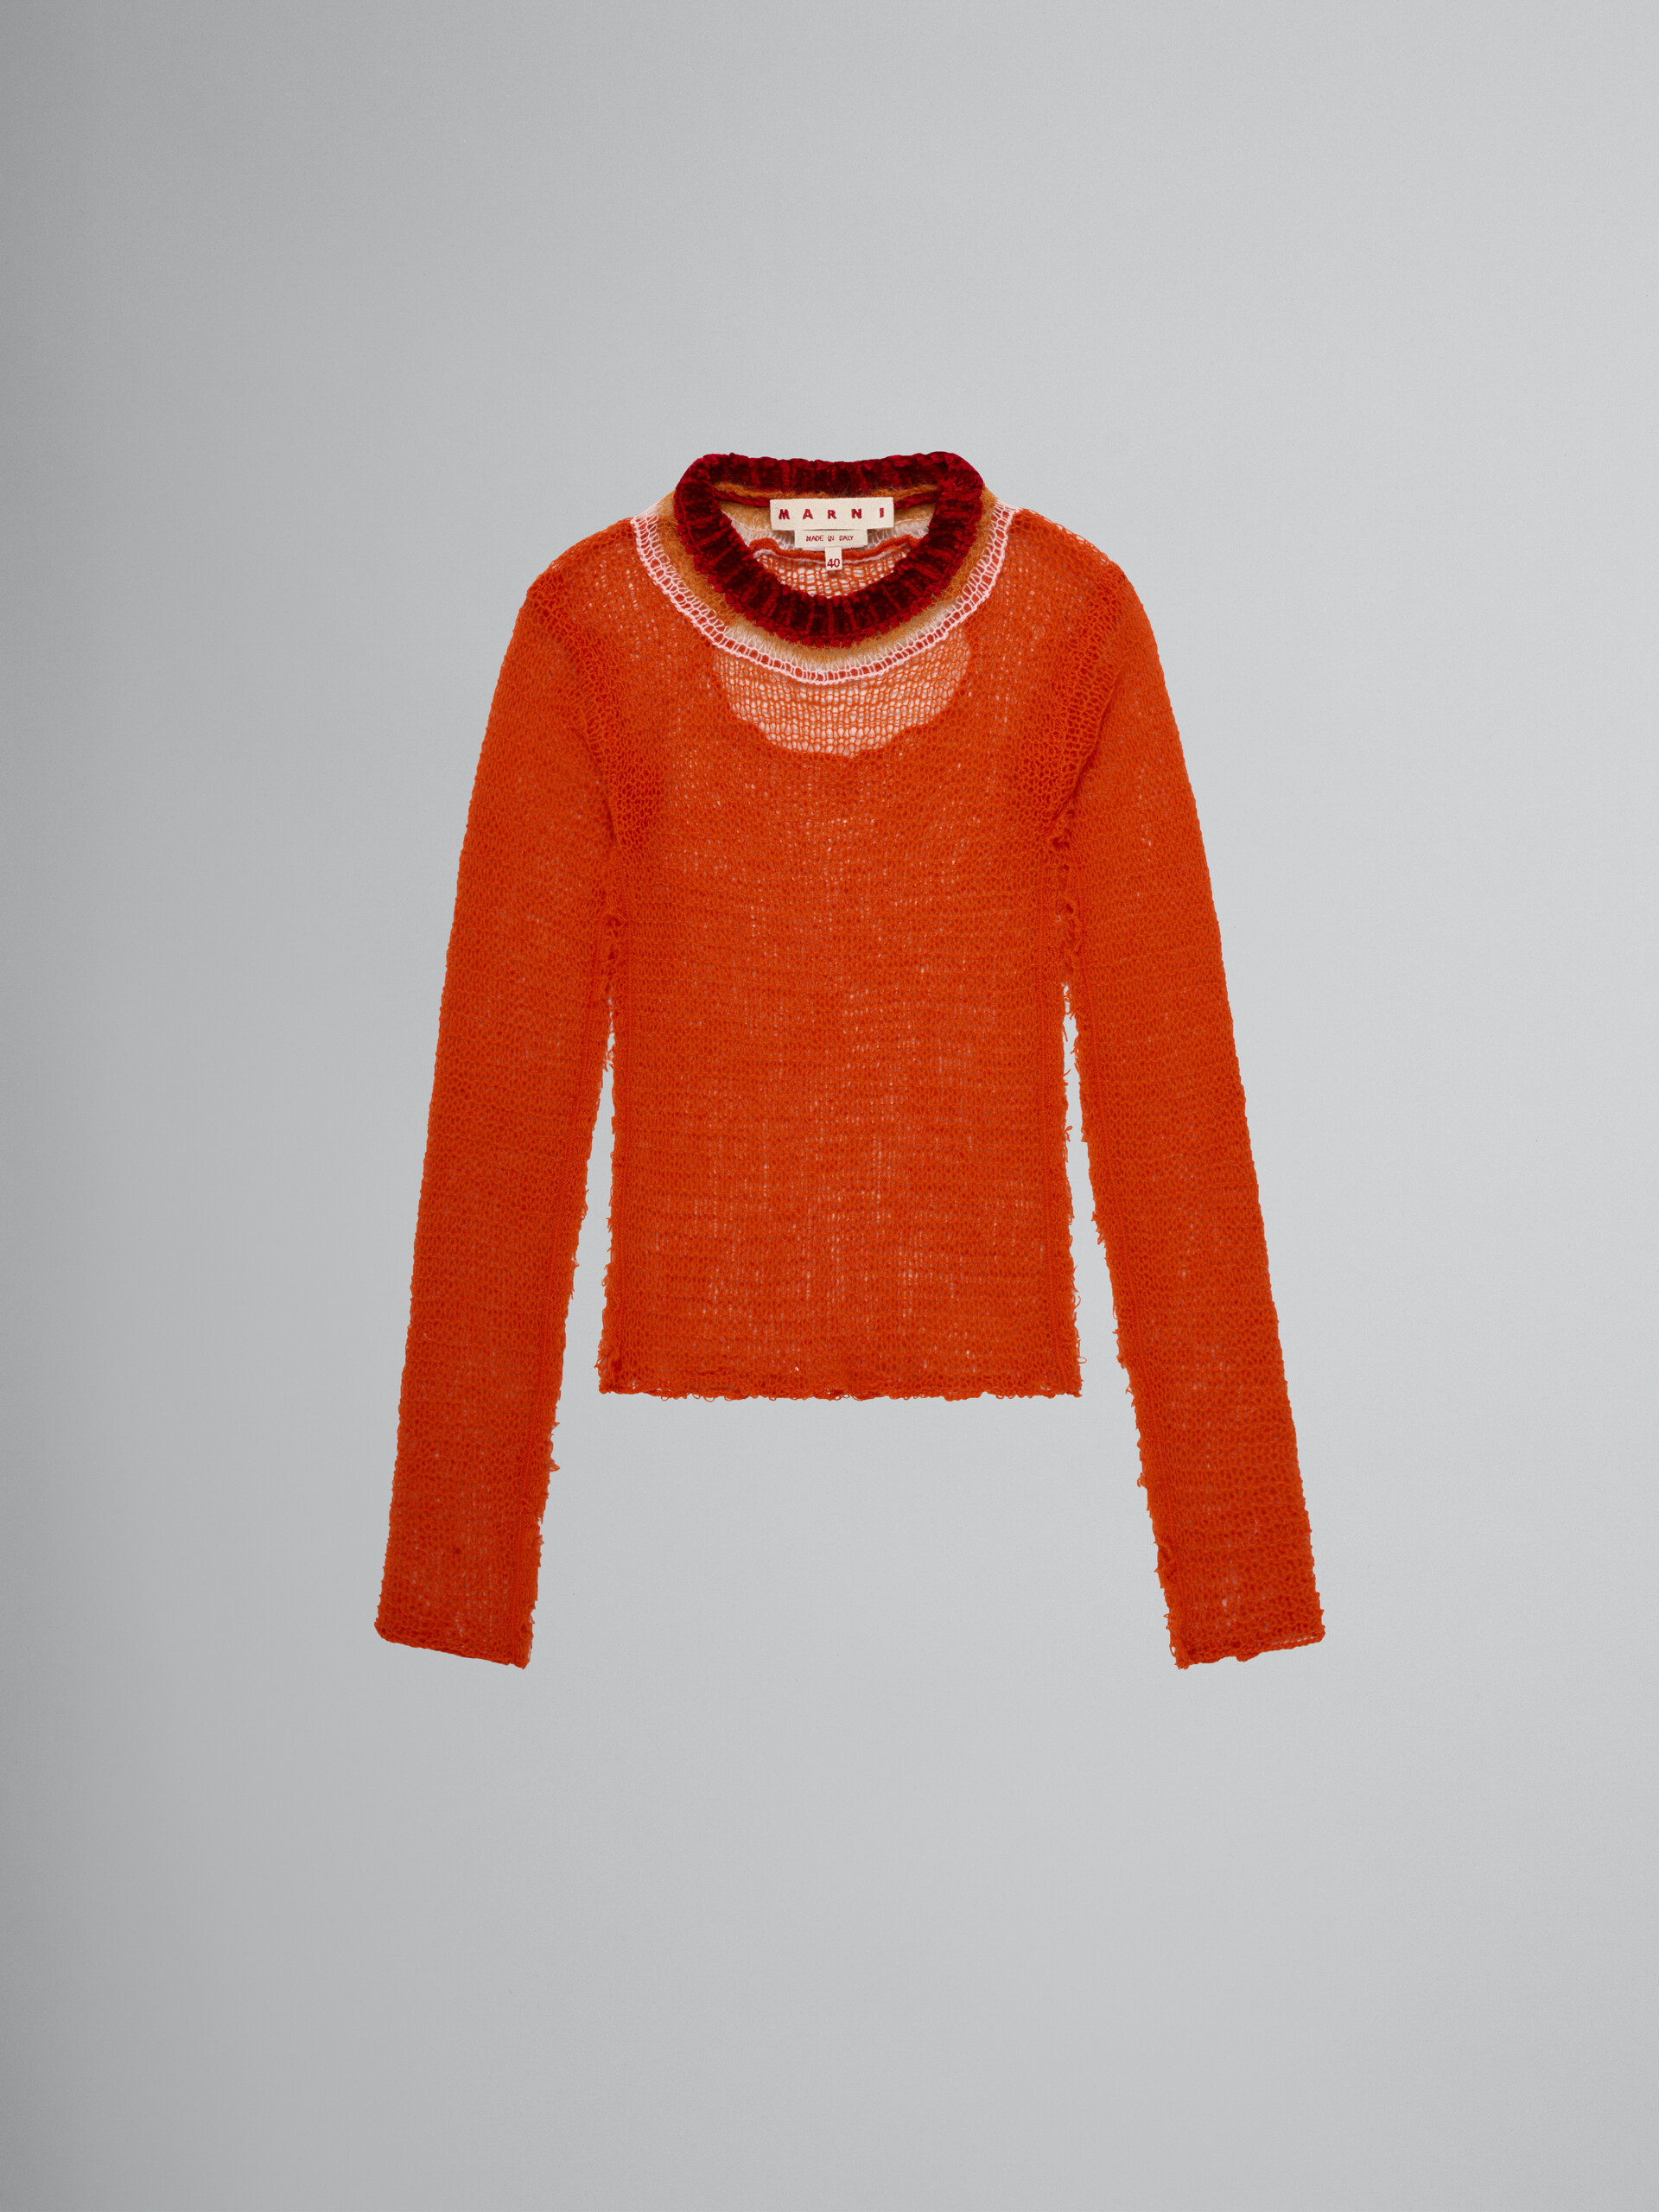 Orange wool and cashmere mesh jumper with cutout - Pullovers - Image 1